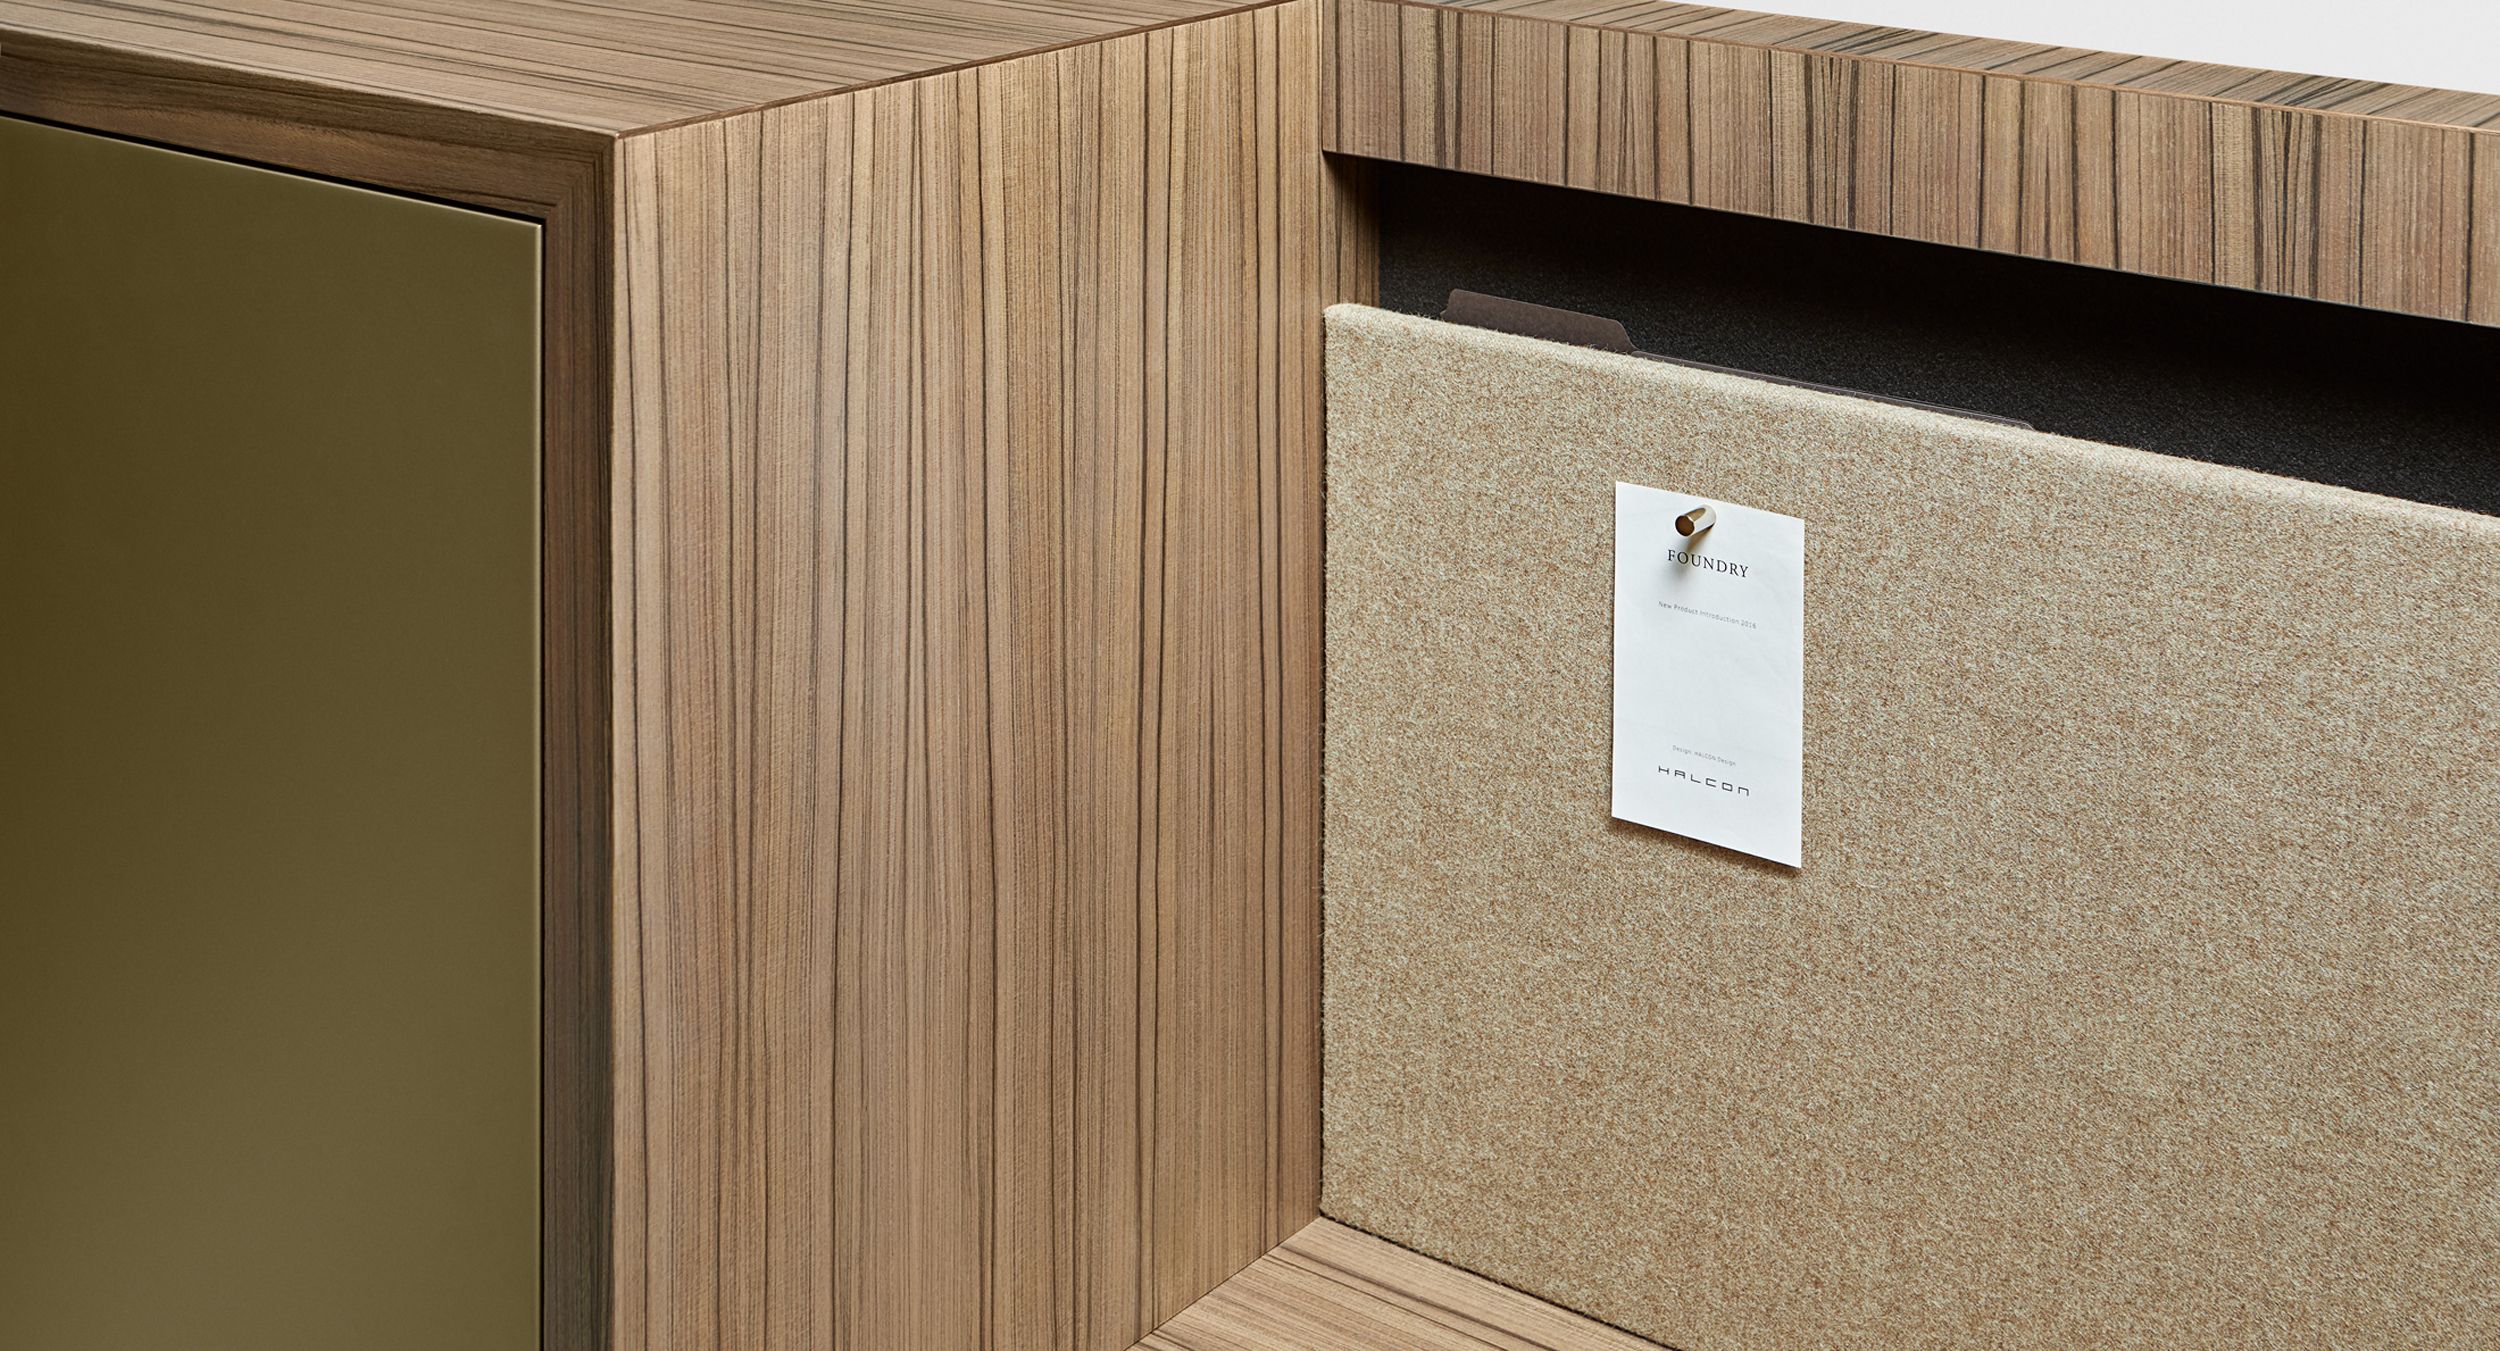 The innovative ‘Foundry File’ and magnetic ‘tackable’ fabric cleanly integrate into the FOUNDRY panel.